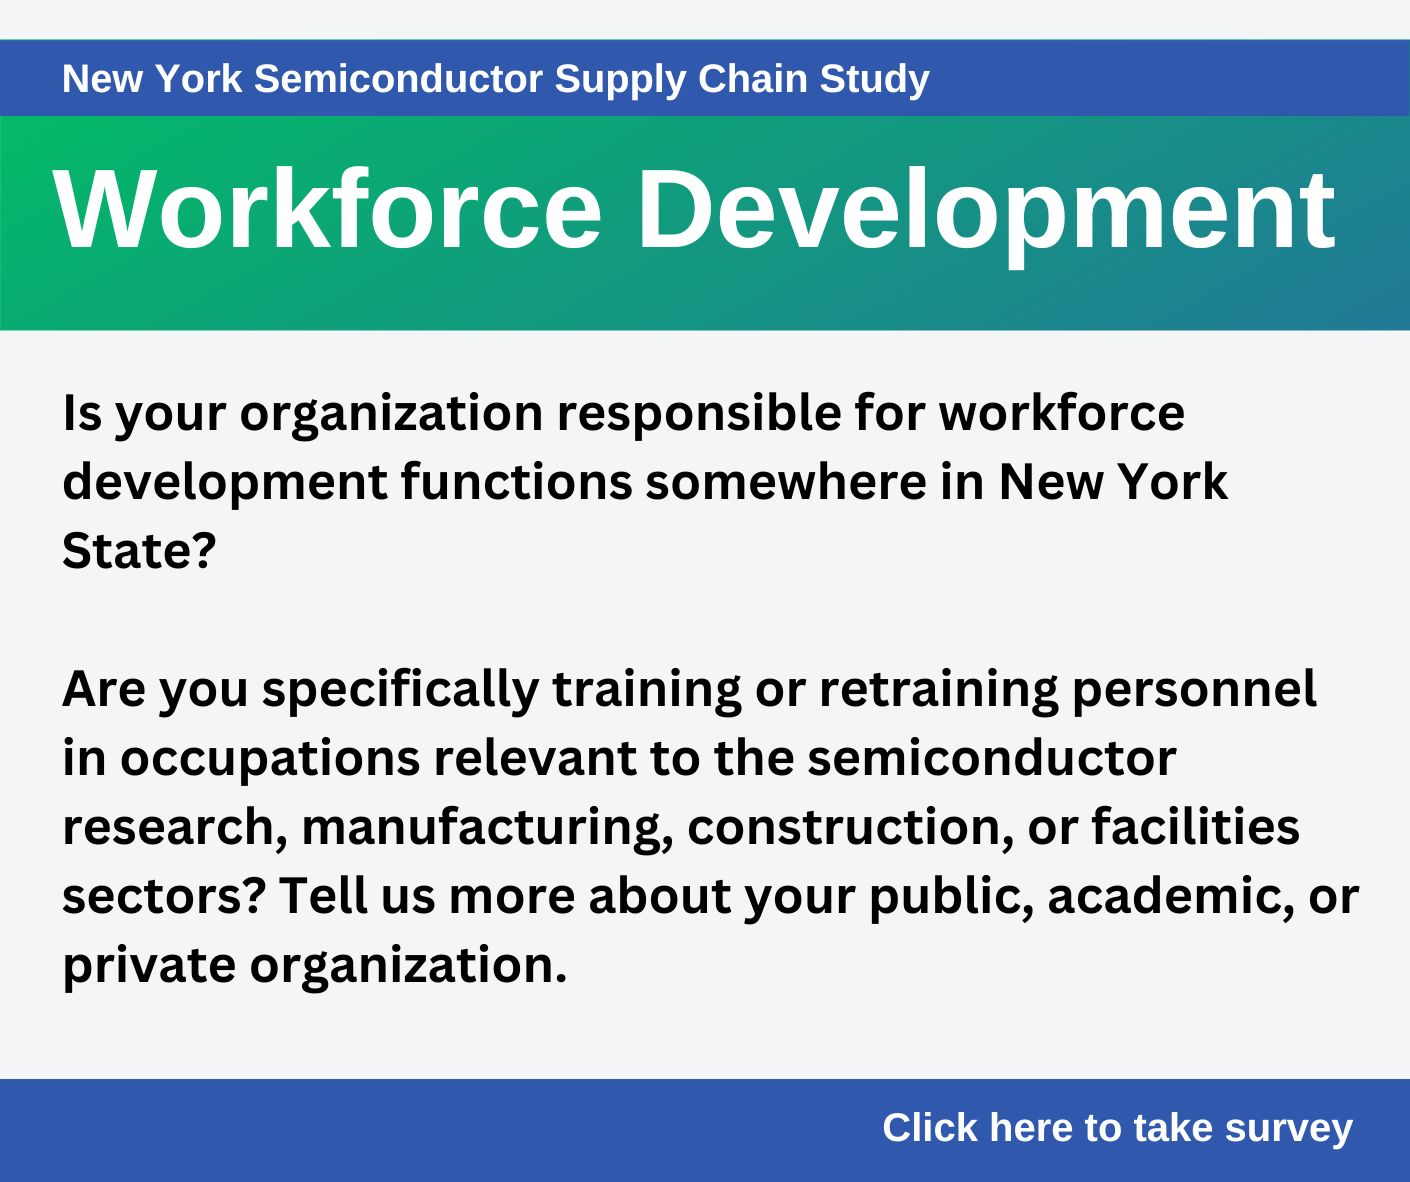 Workforce Development - Is your organization responsible for workforce development functions somewhere in New York State? Are you specifically training or retraining personnel in occupations relevant to the semiconductor research, manufacturing, construction, or facitilites sectors? Tell us more about your public, academic, or private organization. Take the survey.